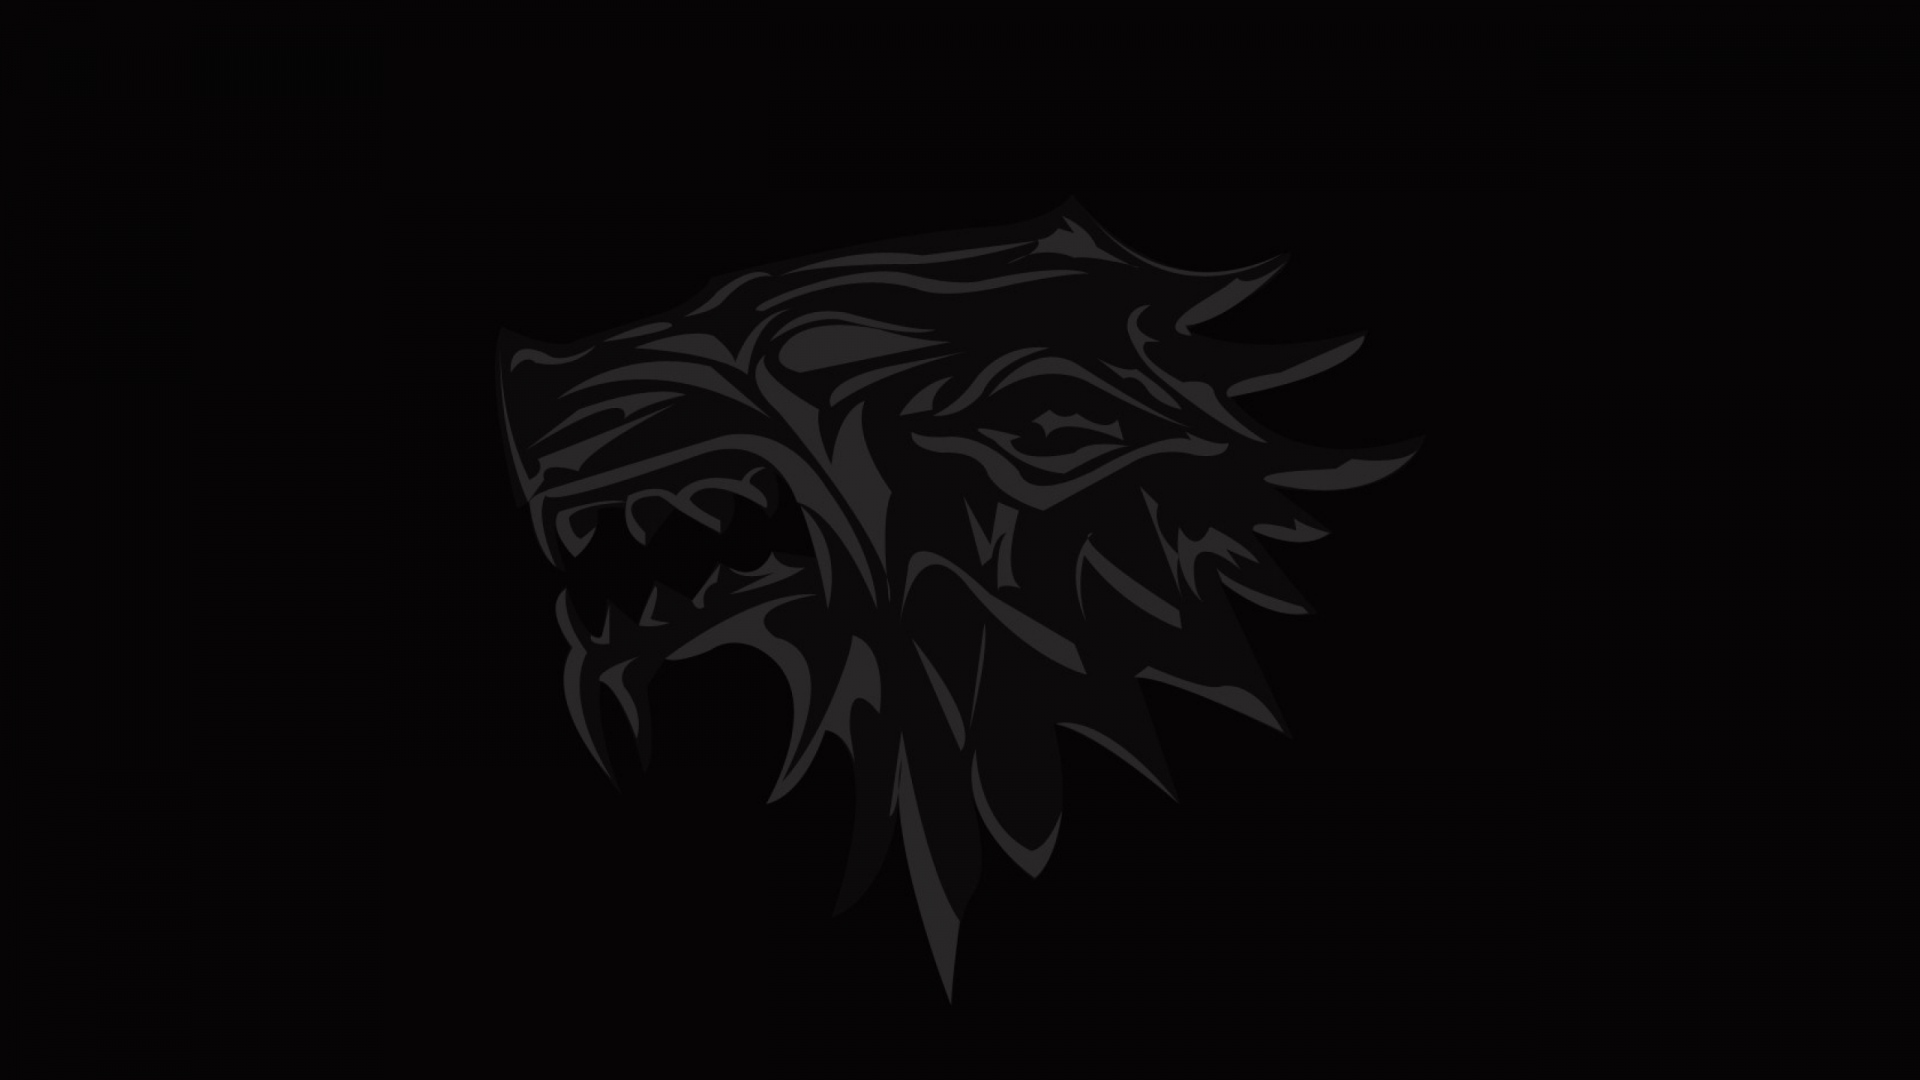 Download Wallpaper 1920x1080 House of stark Game of thrones Logo